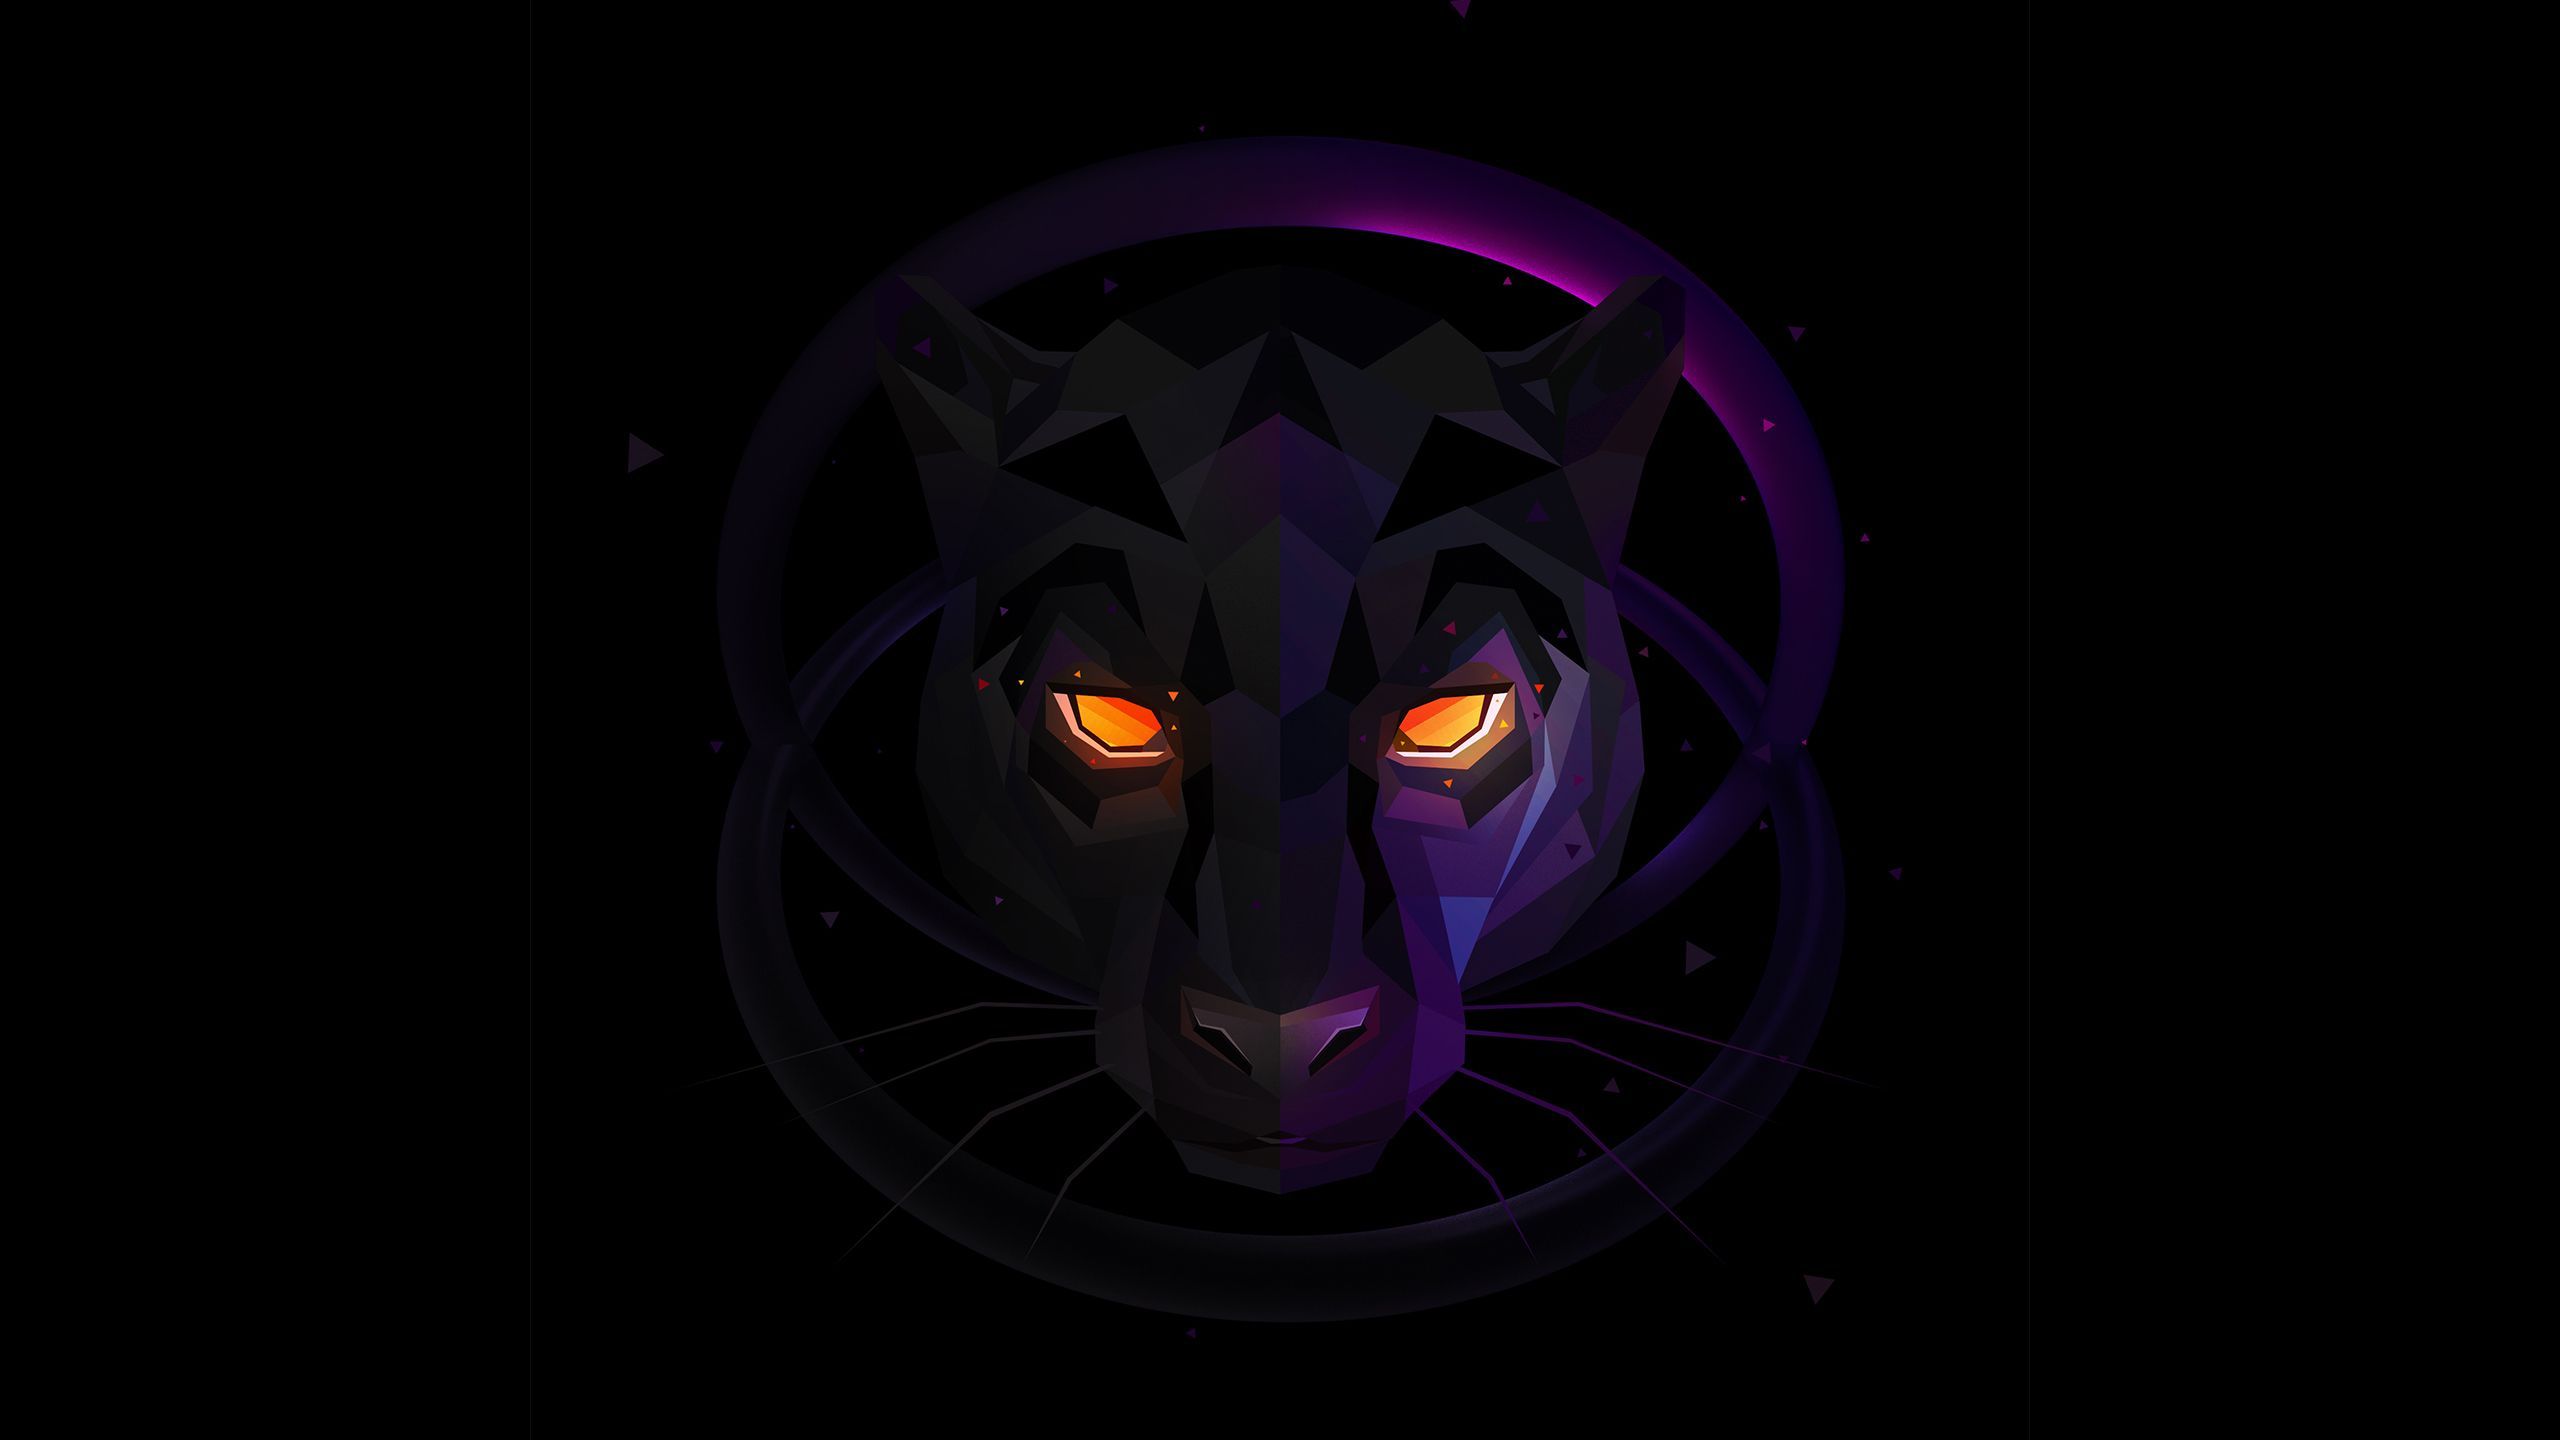 Neon Panther Animal Wallpapers - Wallpaper Cave